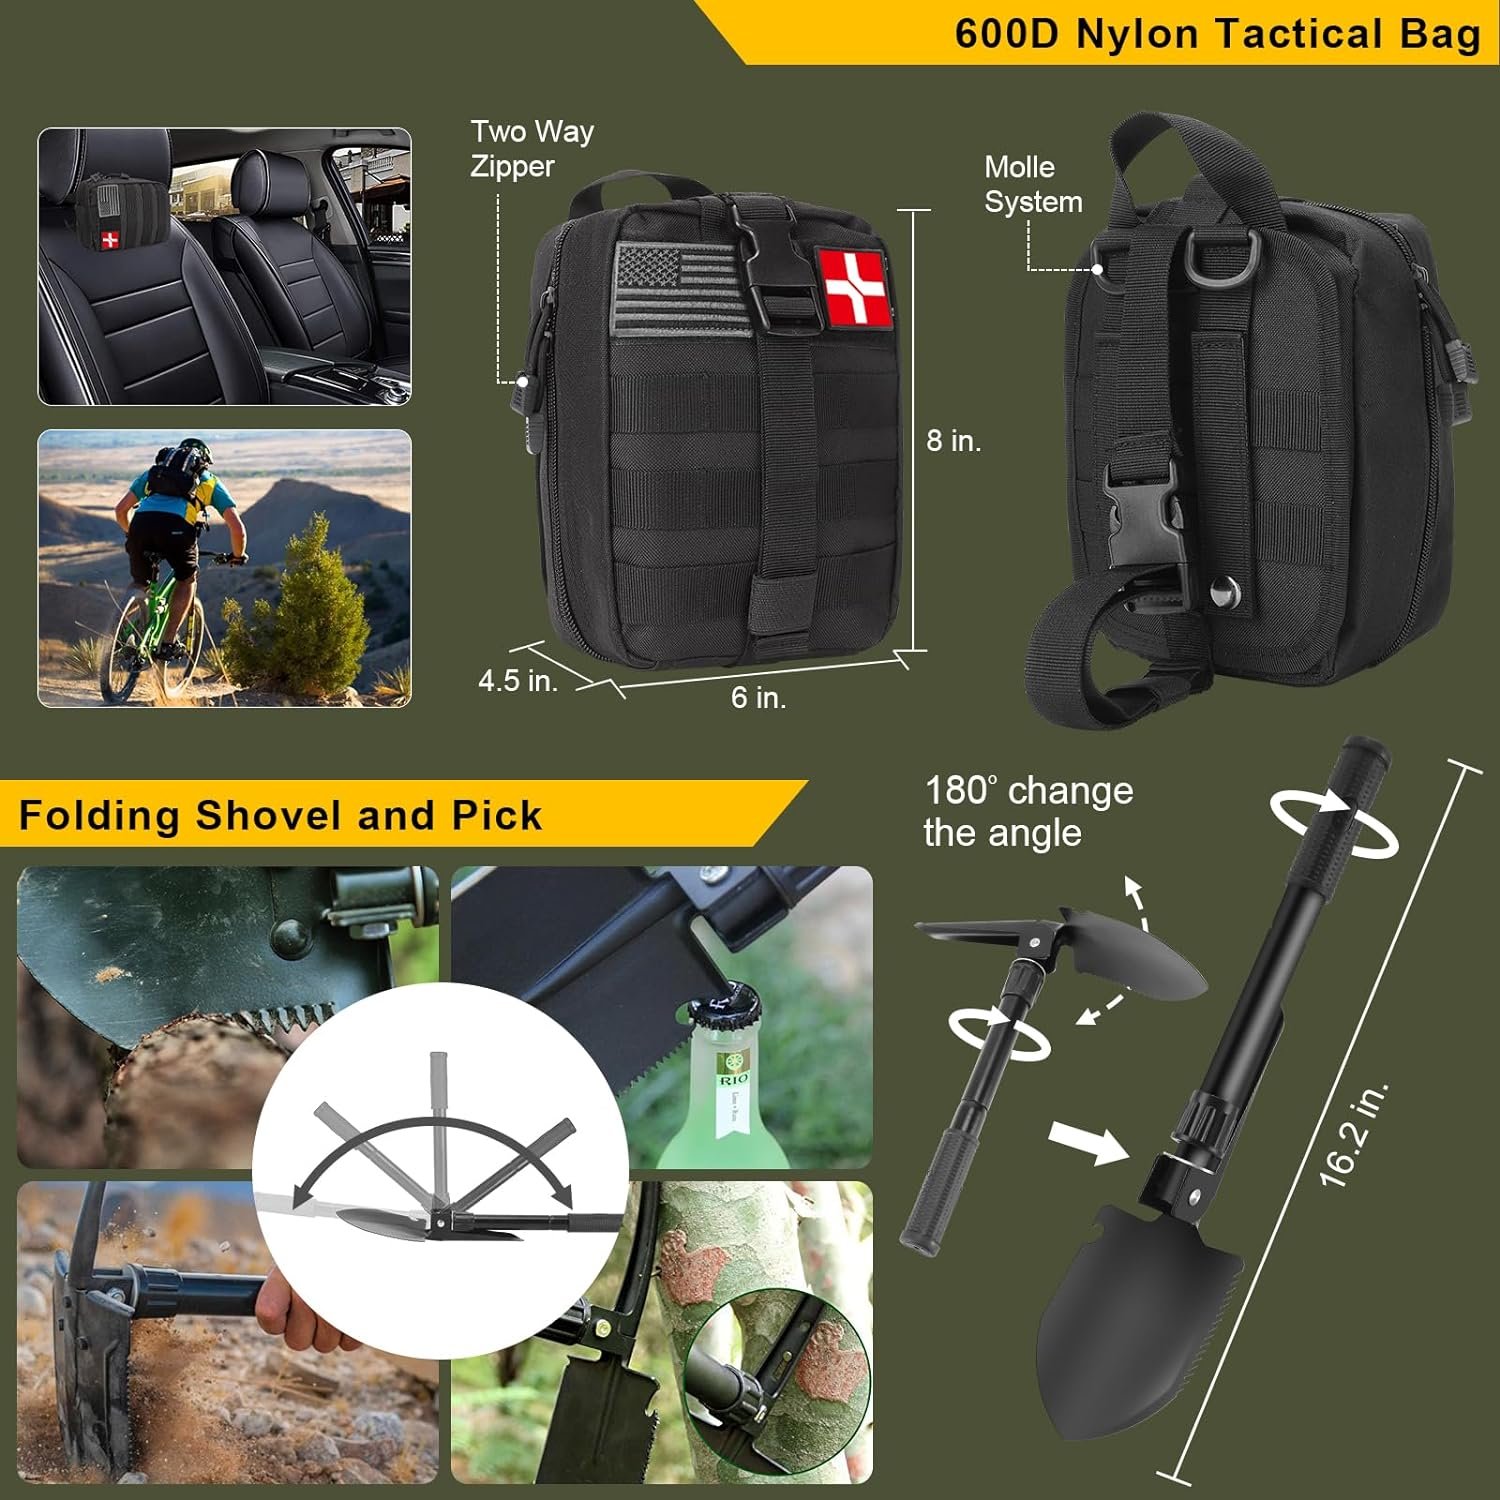 Survival Kit 200 in 1 Review